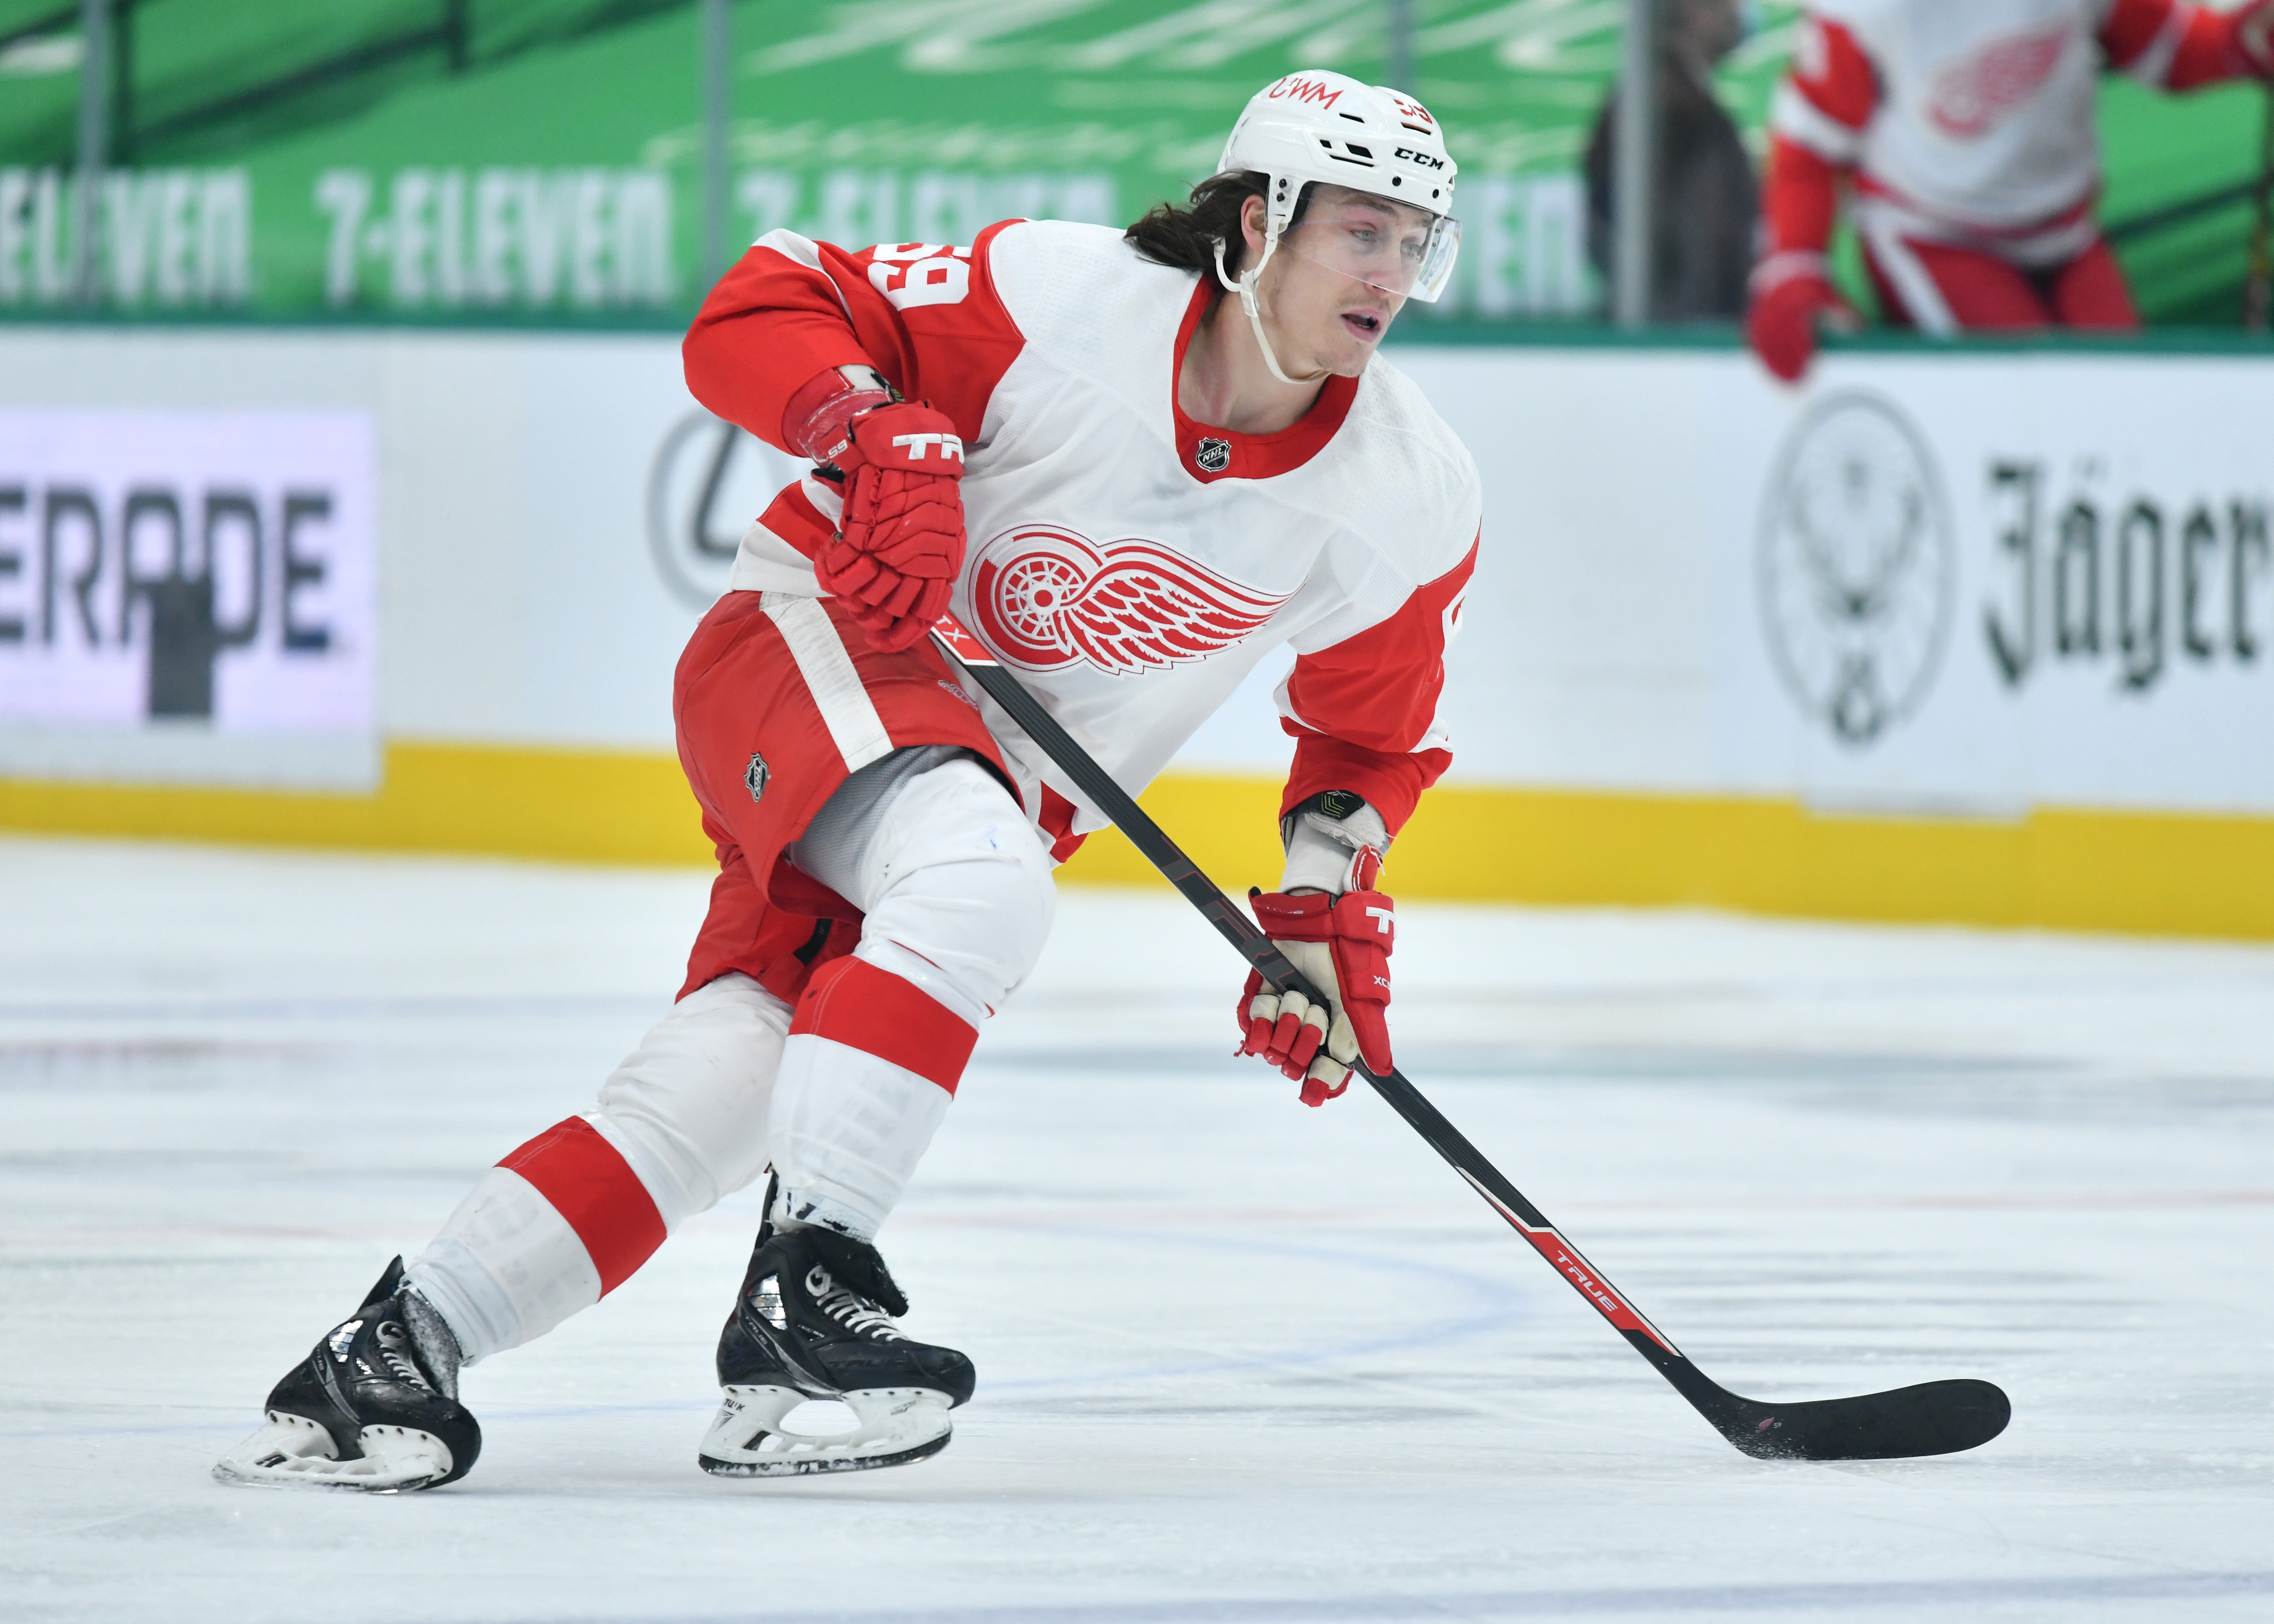 Where Does Tyler Bertuzzi Fit in the Detroit Red Wings' Lineup?